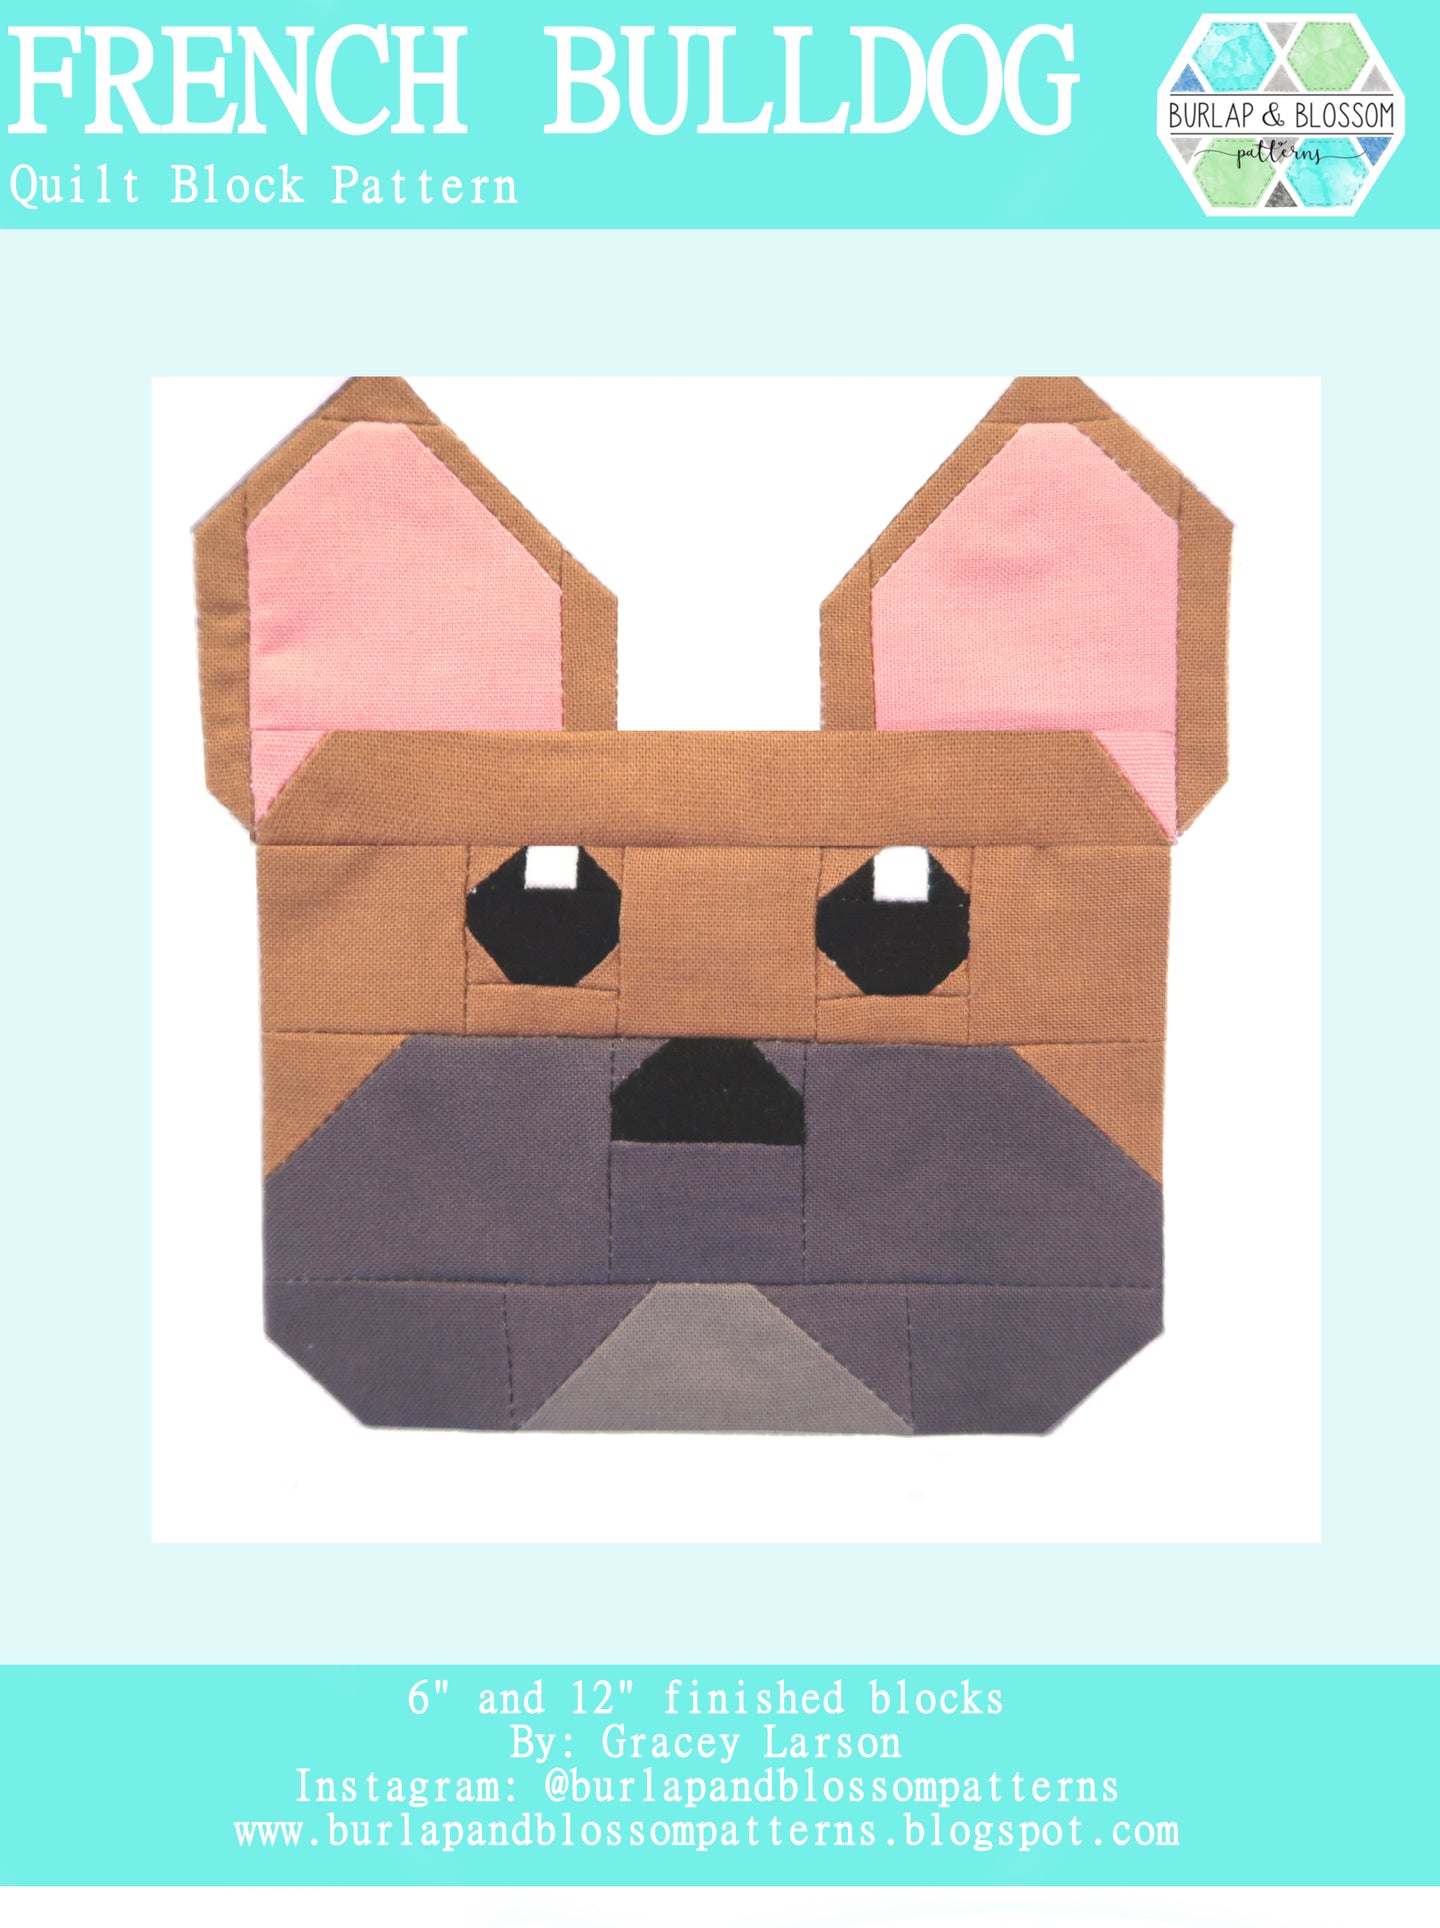 Pattern, French Bull Dog Quilt Block by Burlap and Blossom (digital download)